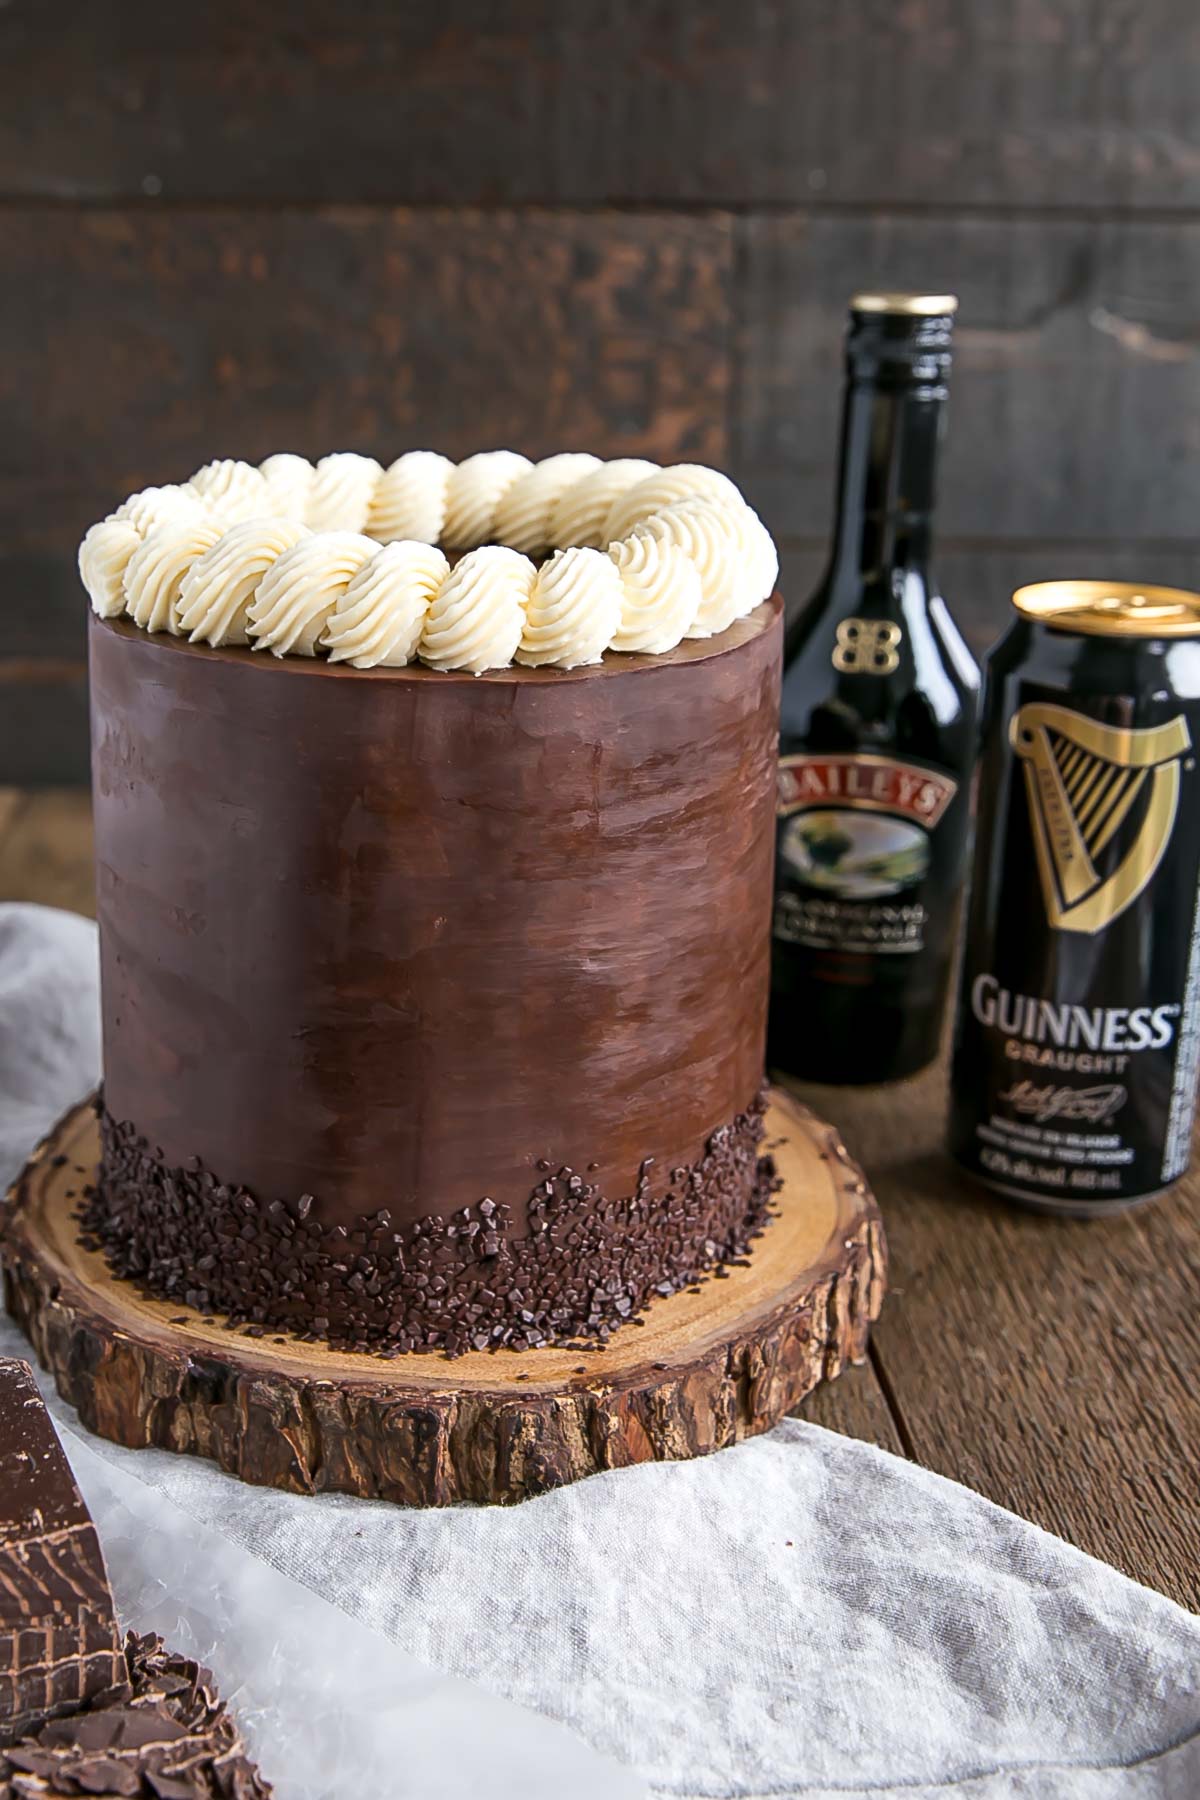 Chocolate Cake with Guinness and Baileys in the background.